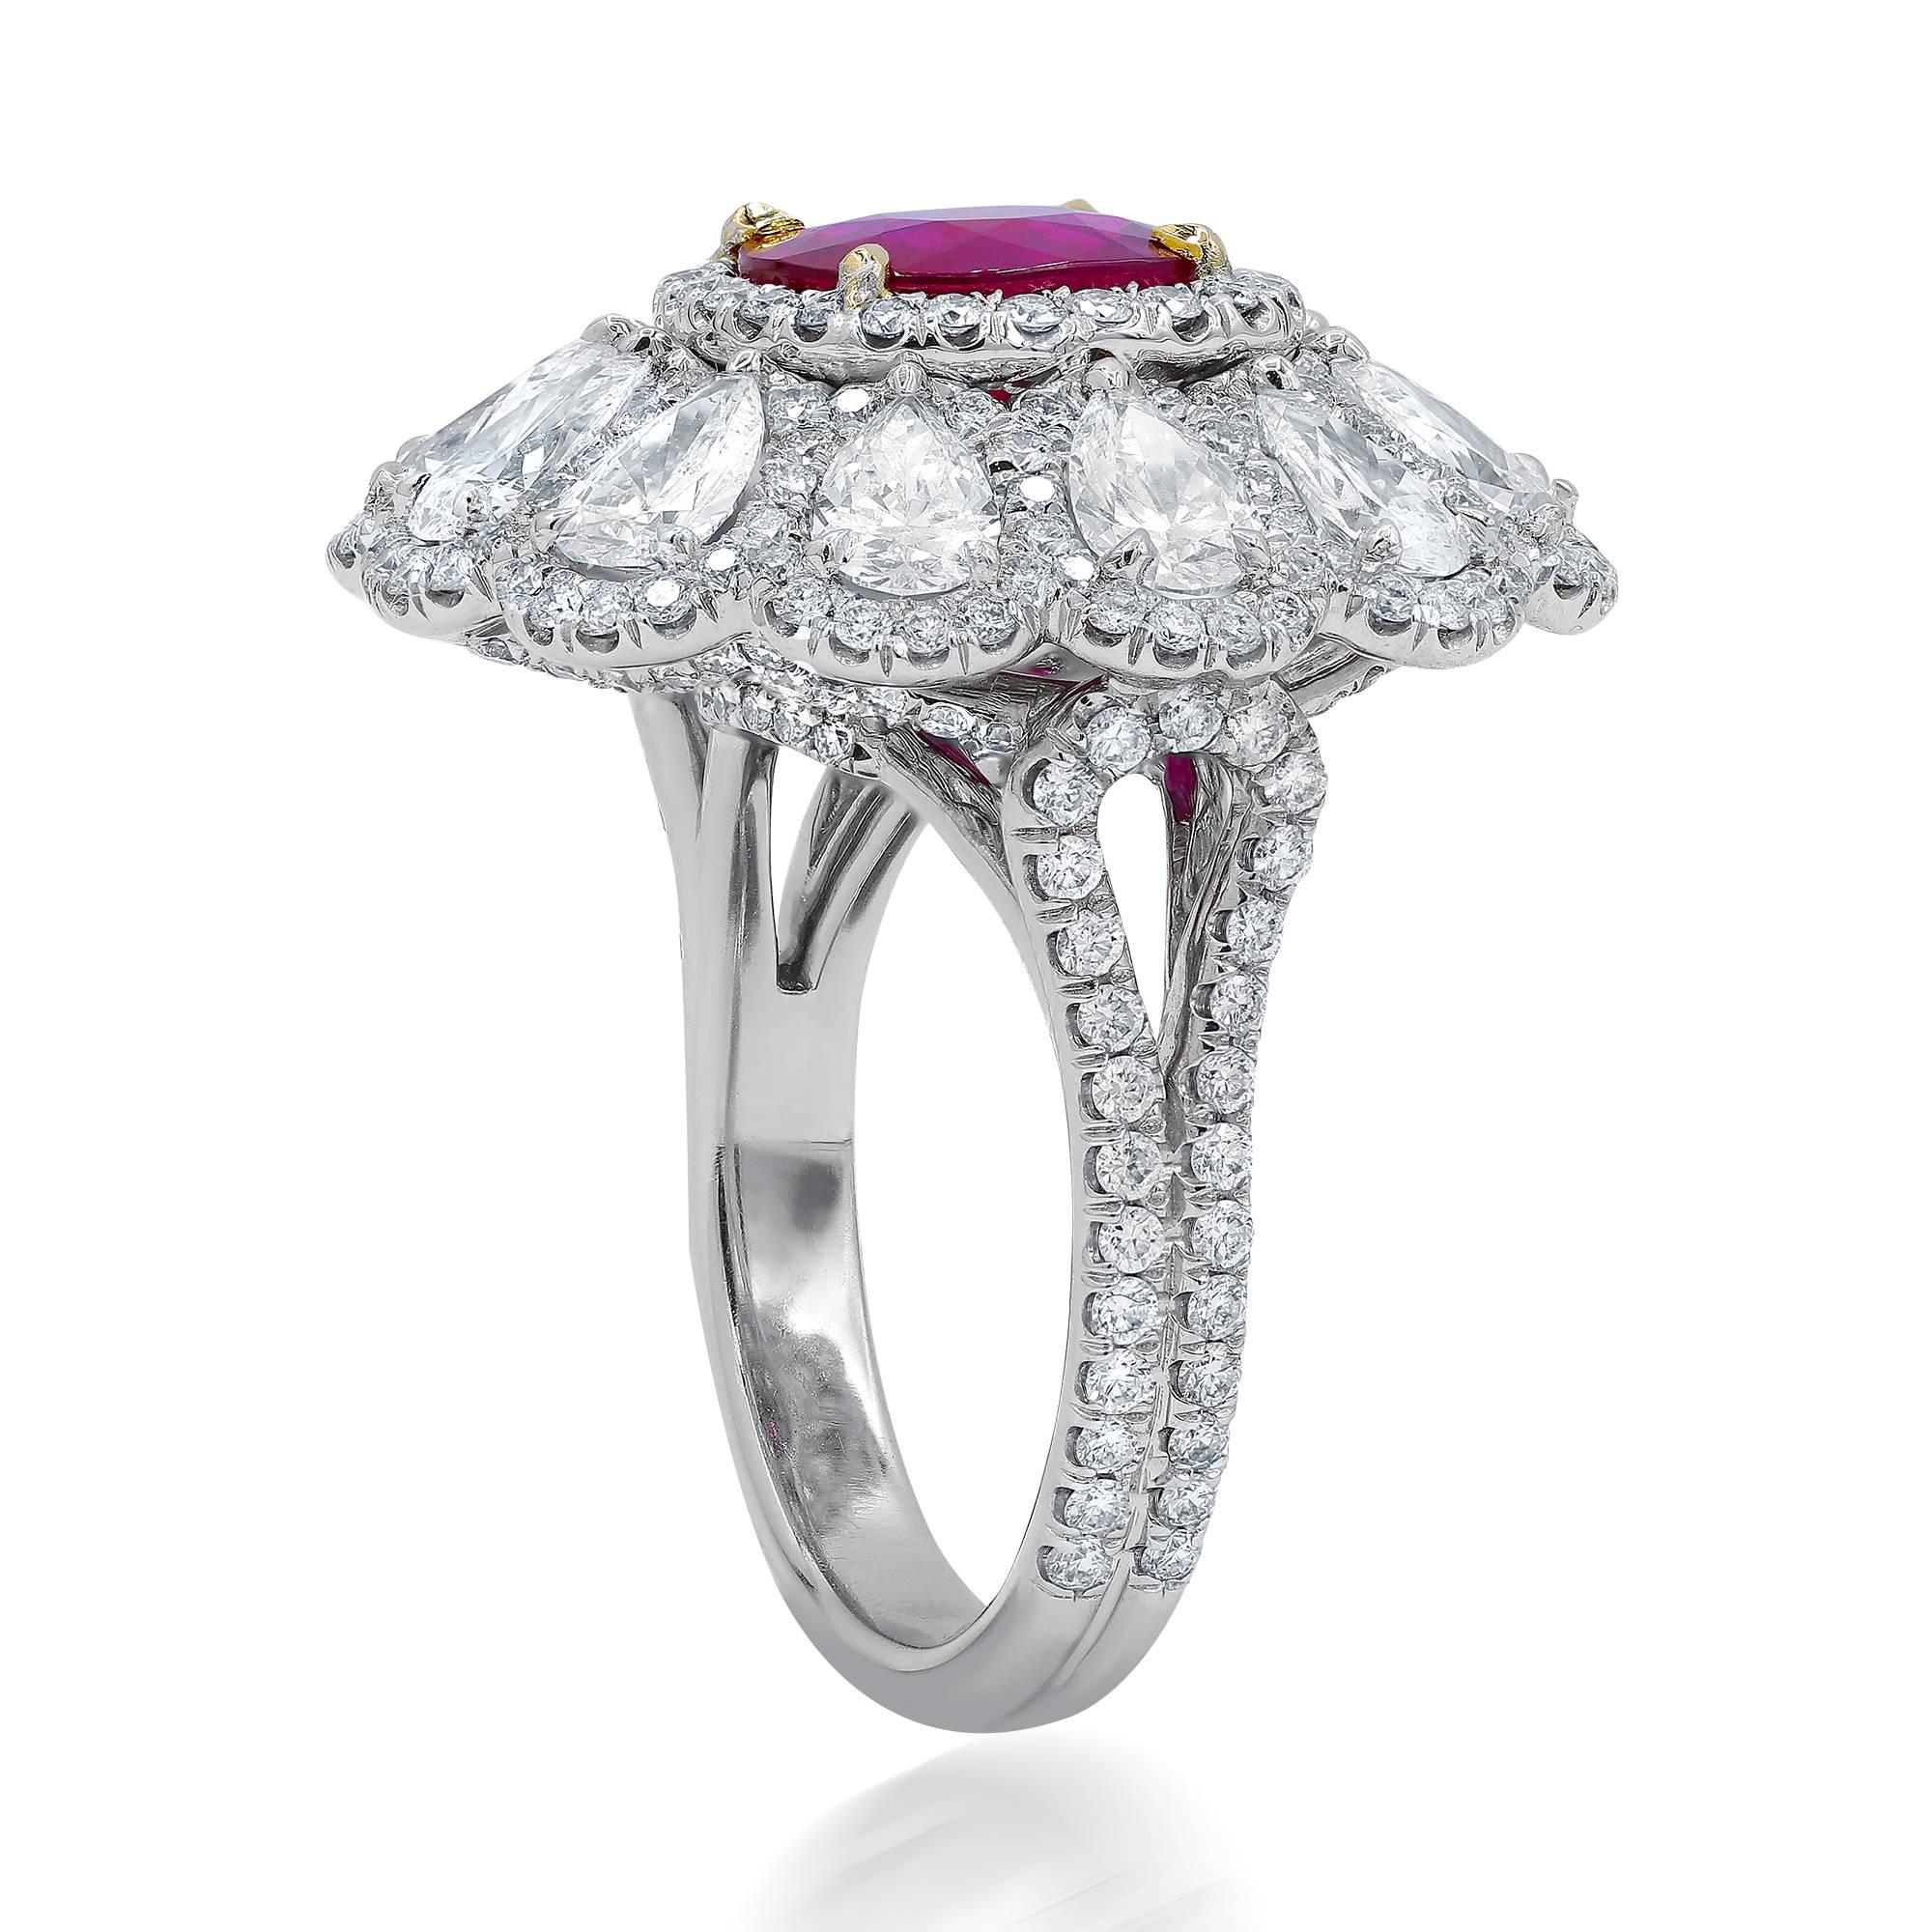 Natural Unheated Ruby and Diamond Ring, Certified by GRS Laboratory, features 3.00 Carat Cushion Shape, No Heat Ruby, intense red color, surrounded by 12 Pear Shaped diamonds totaling 4.20 Carats. 

Metal: Platinum
Center Stone: 3.00 Carat Ruby, NO